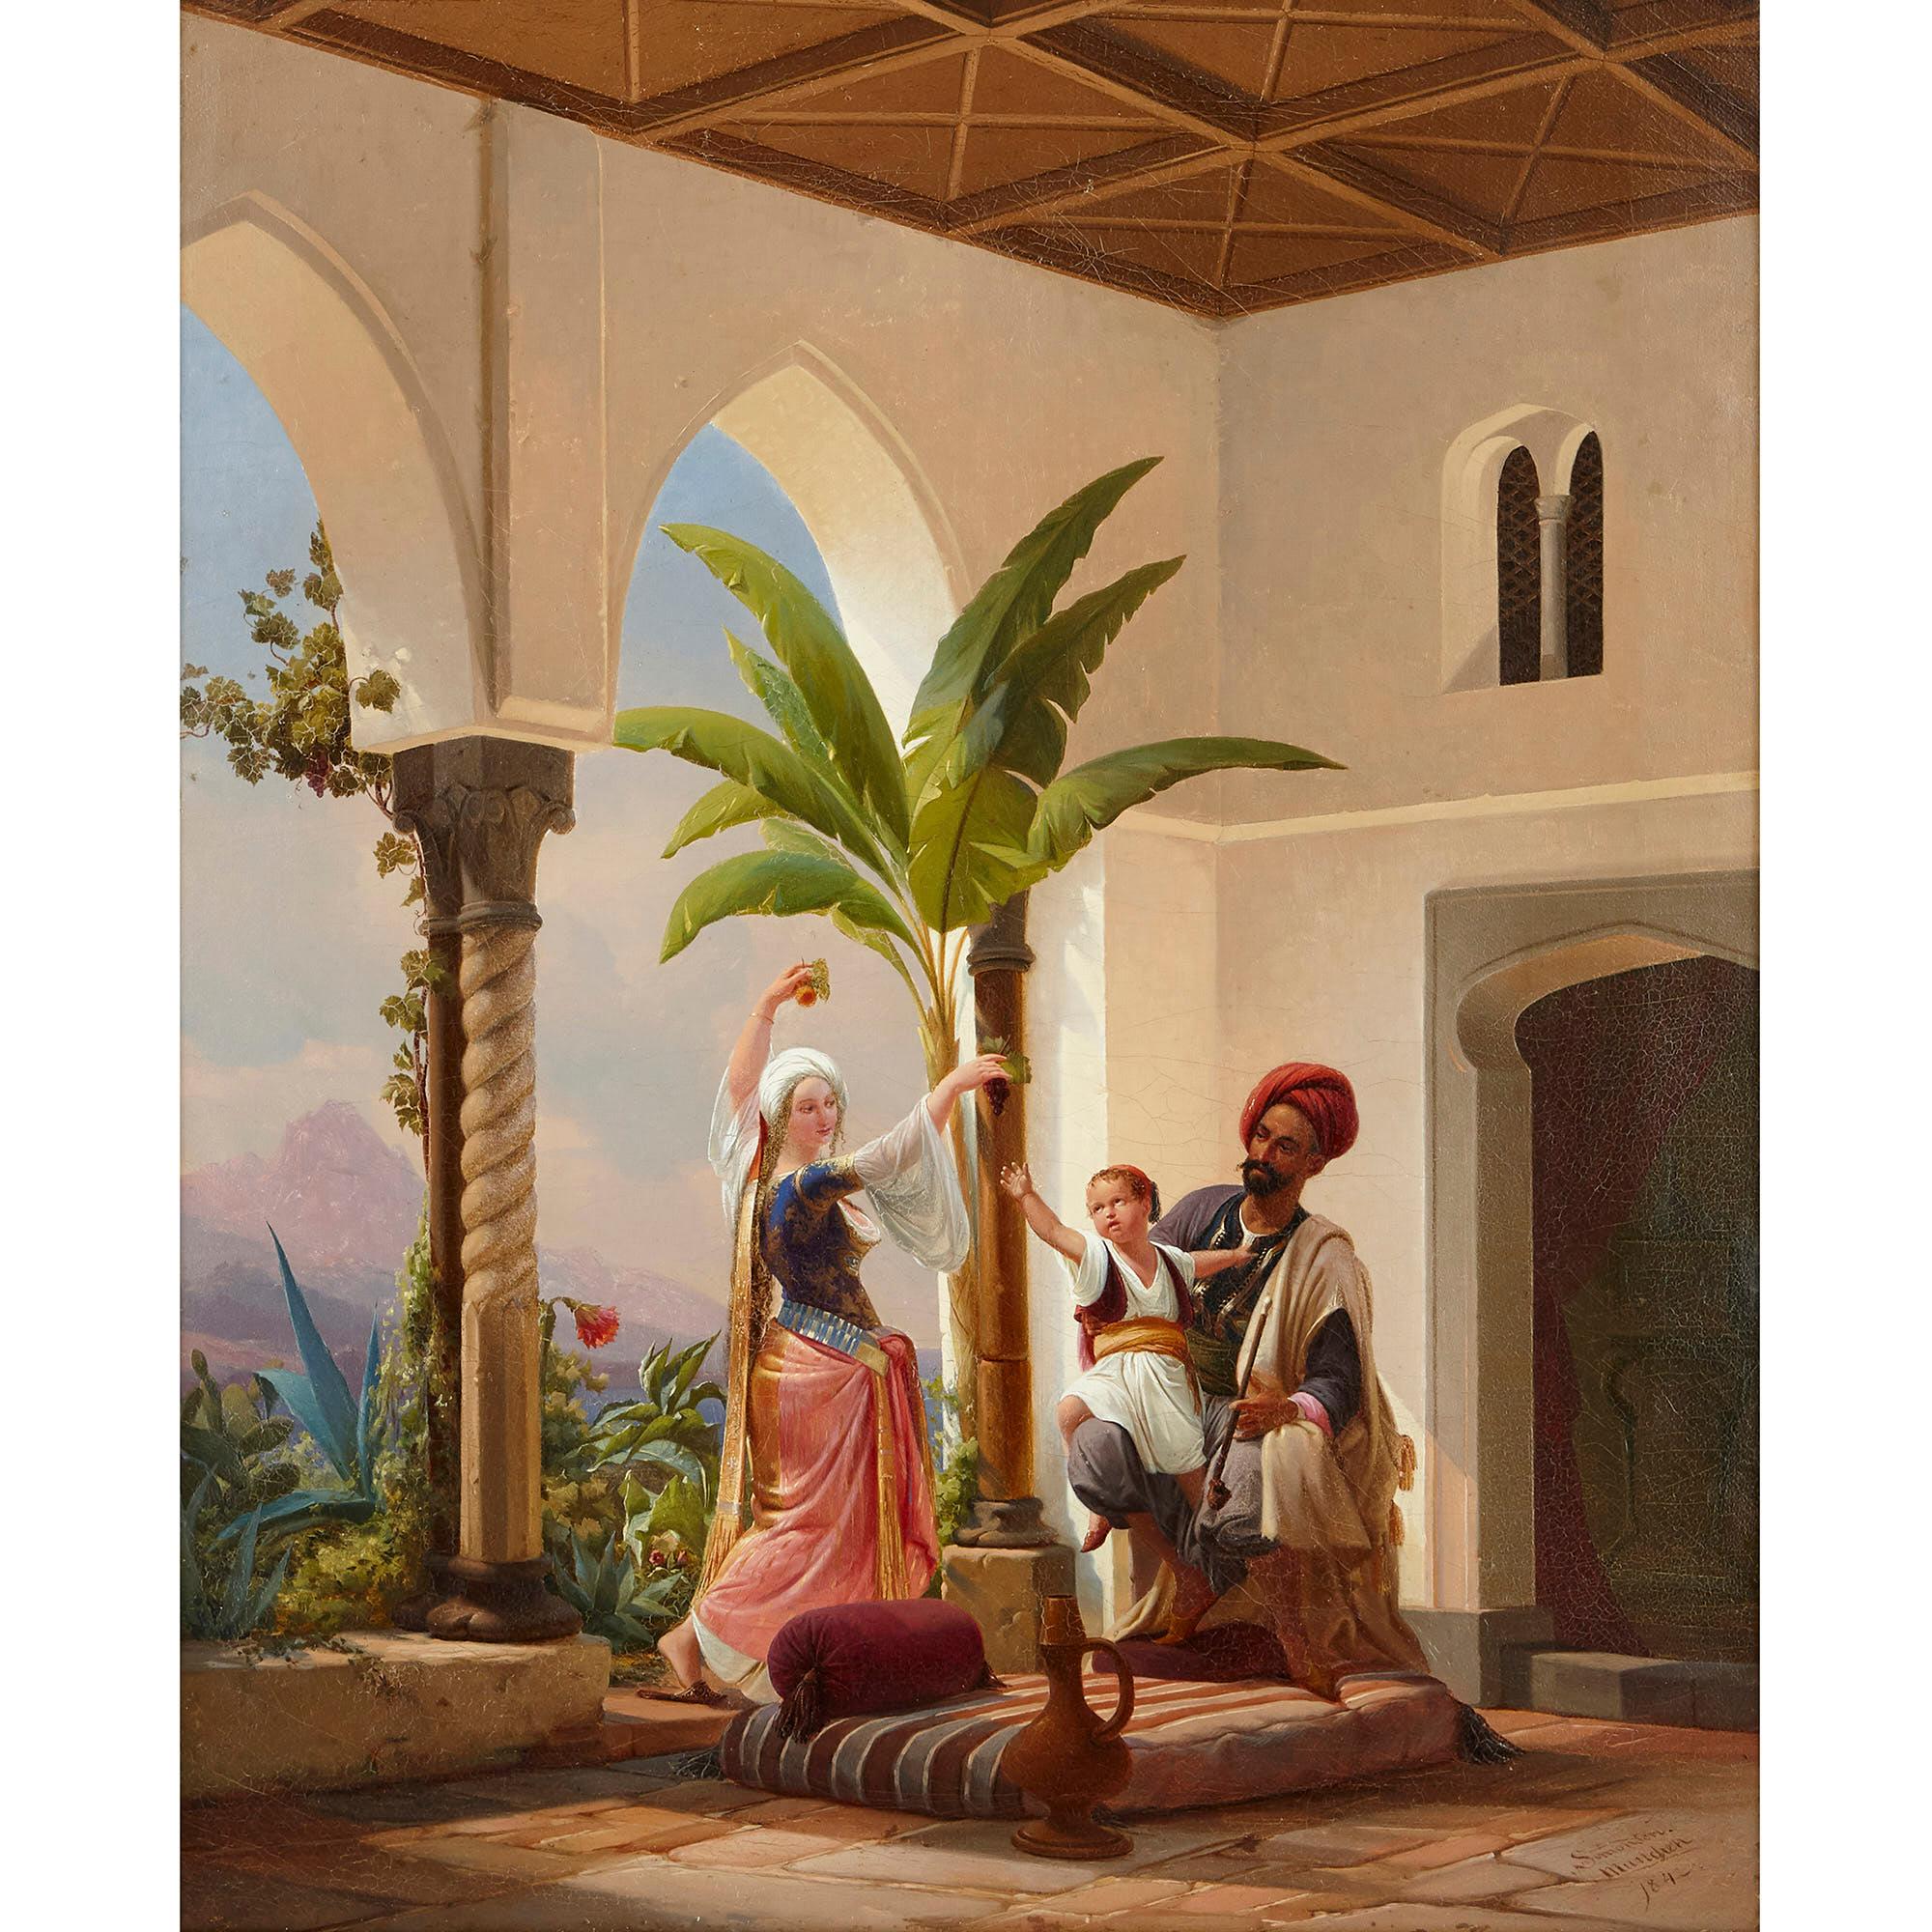 Orientalist painting of parents playing with their son by Simonsen - Painting by Niels Simonsen